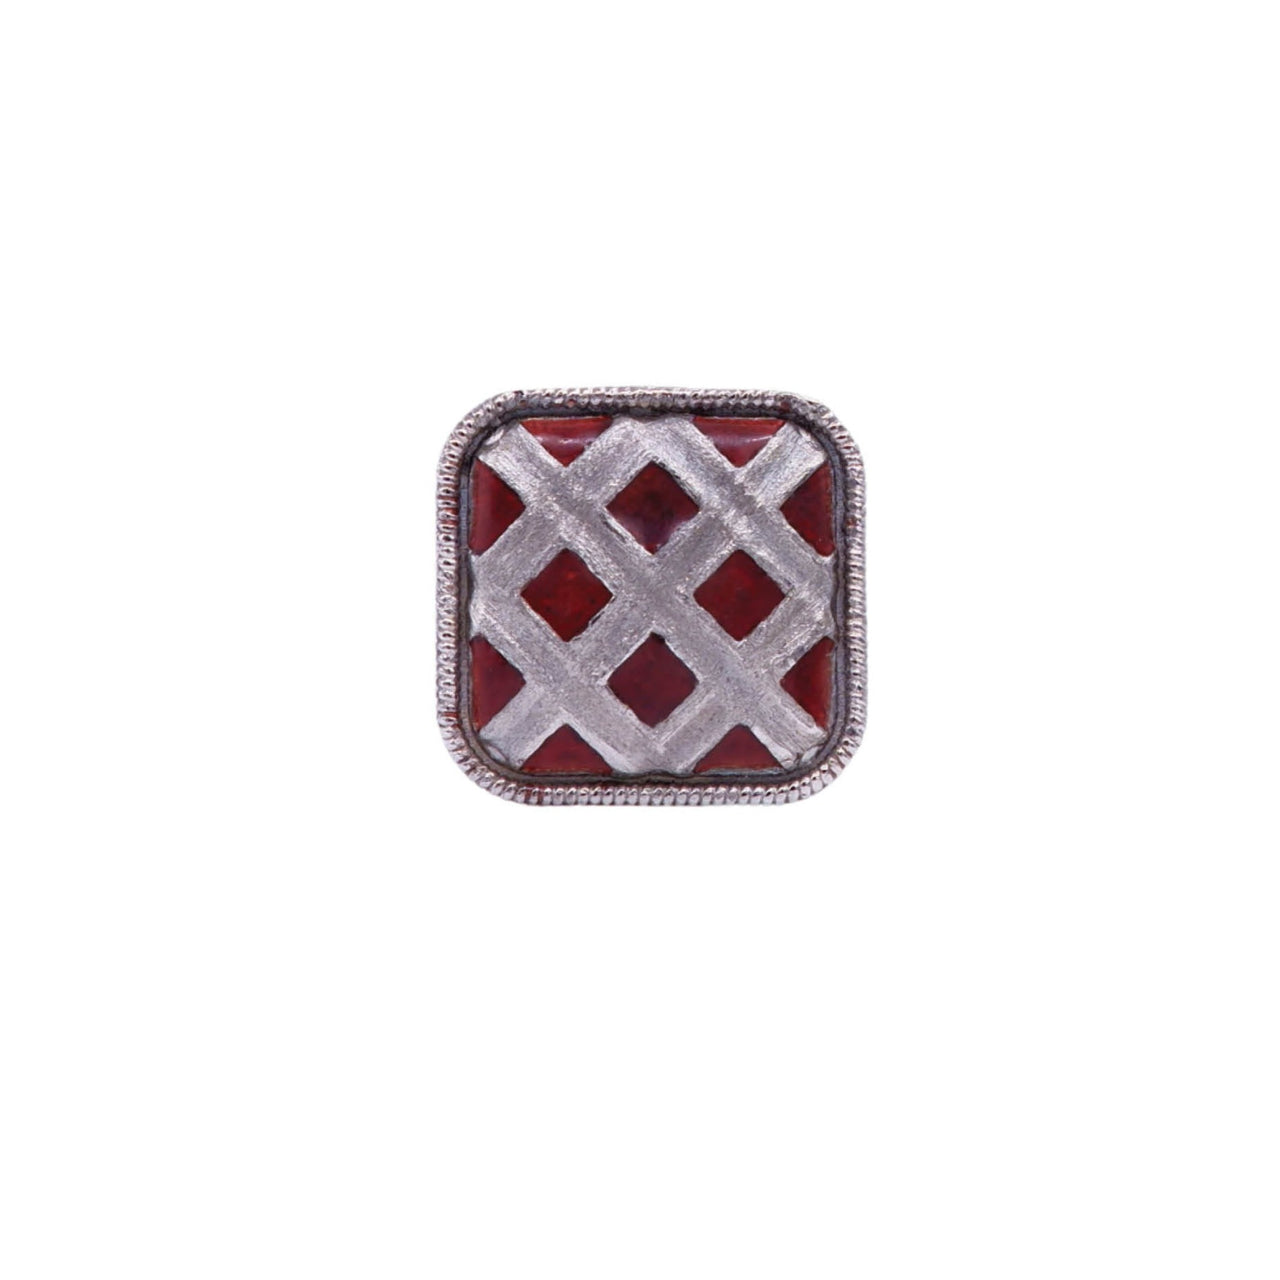 Criss cross pattern ring silver and red